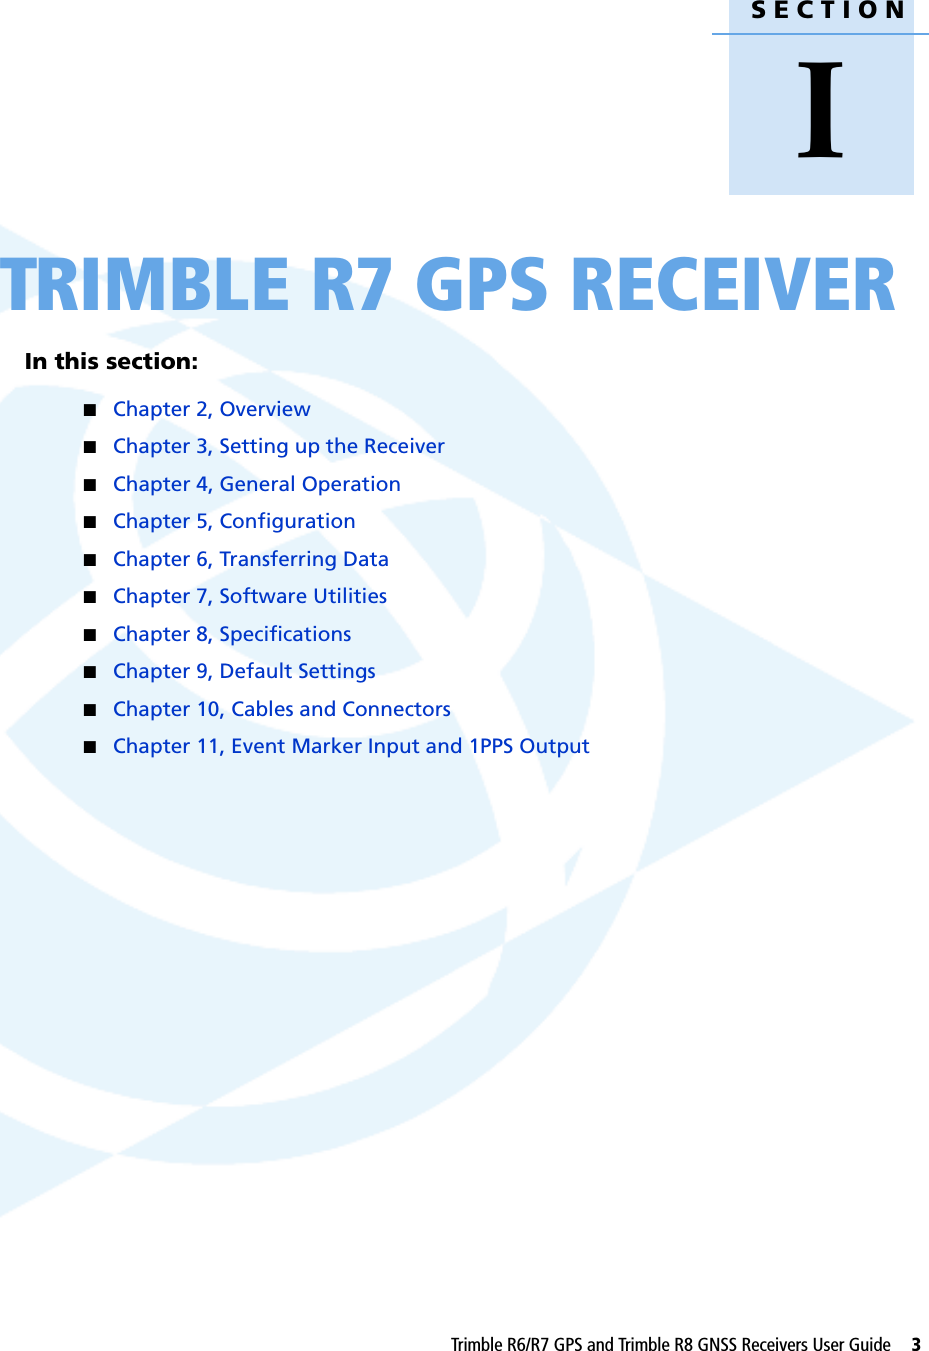 SECTIONITrimble R6/R7 GPS and Trimble R8 GNSS Receivers User Guide     3ITRIMBLE R7 GPS RECEIVERIn this section:QChapter 2, OverviewQChapter 3, Setting up the ReceiverQChapter 4, General OperationQChapter 5, ConfigurationQChapter 6, Transferring DataQChapter 7, Software UtilitiesQChapter 8, SpecificationsQChapter 9, Default SettingsQChapter 10, Cables and ConnectorsQChapter 11, Event Marker Input and 1PPS Output